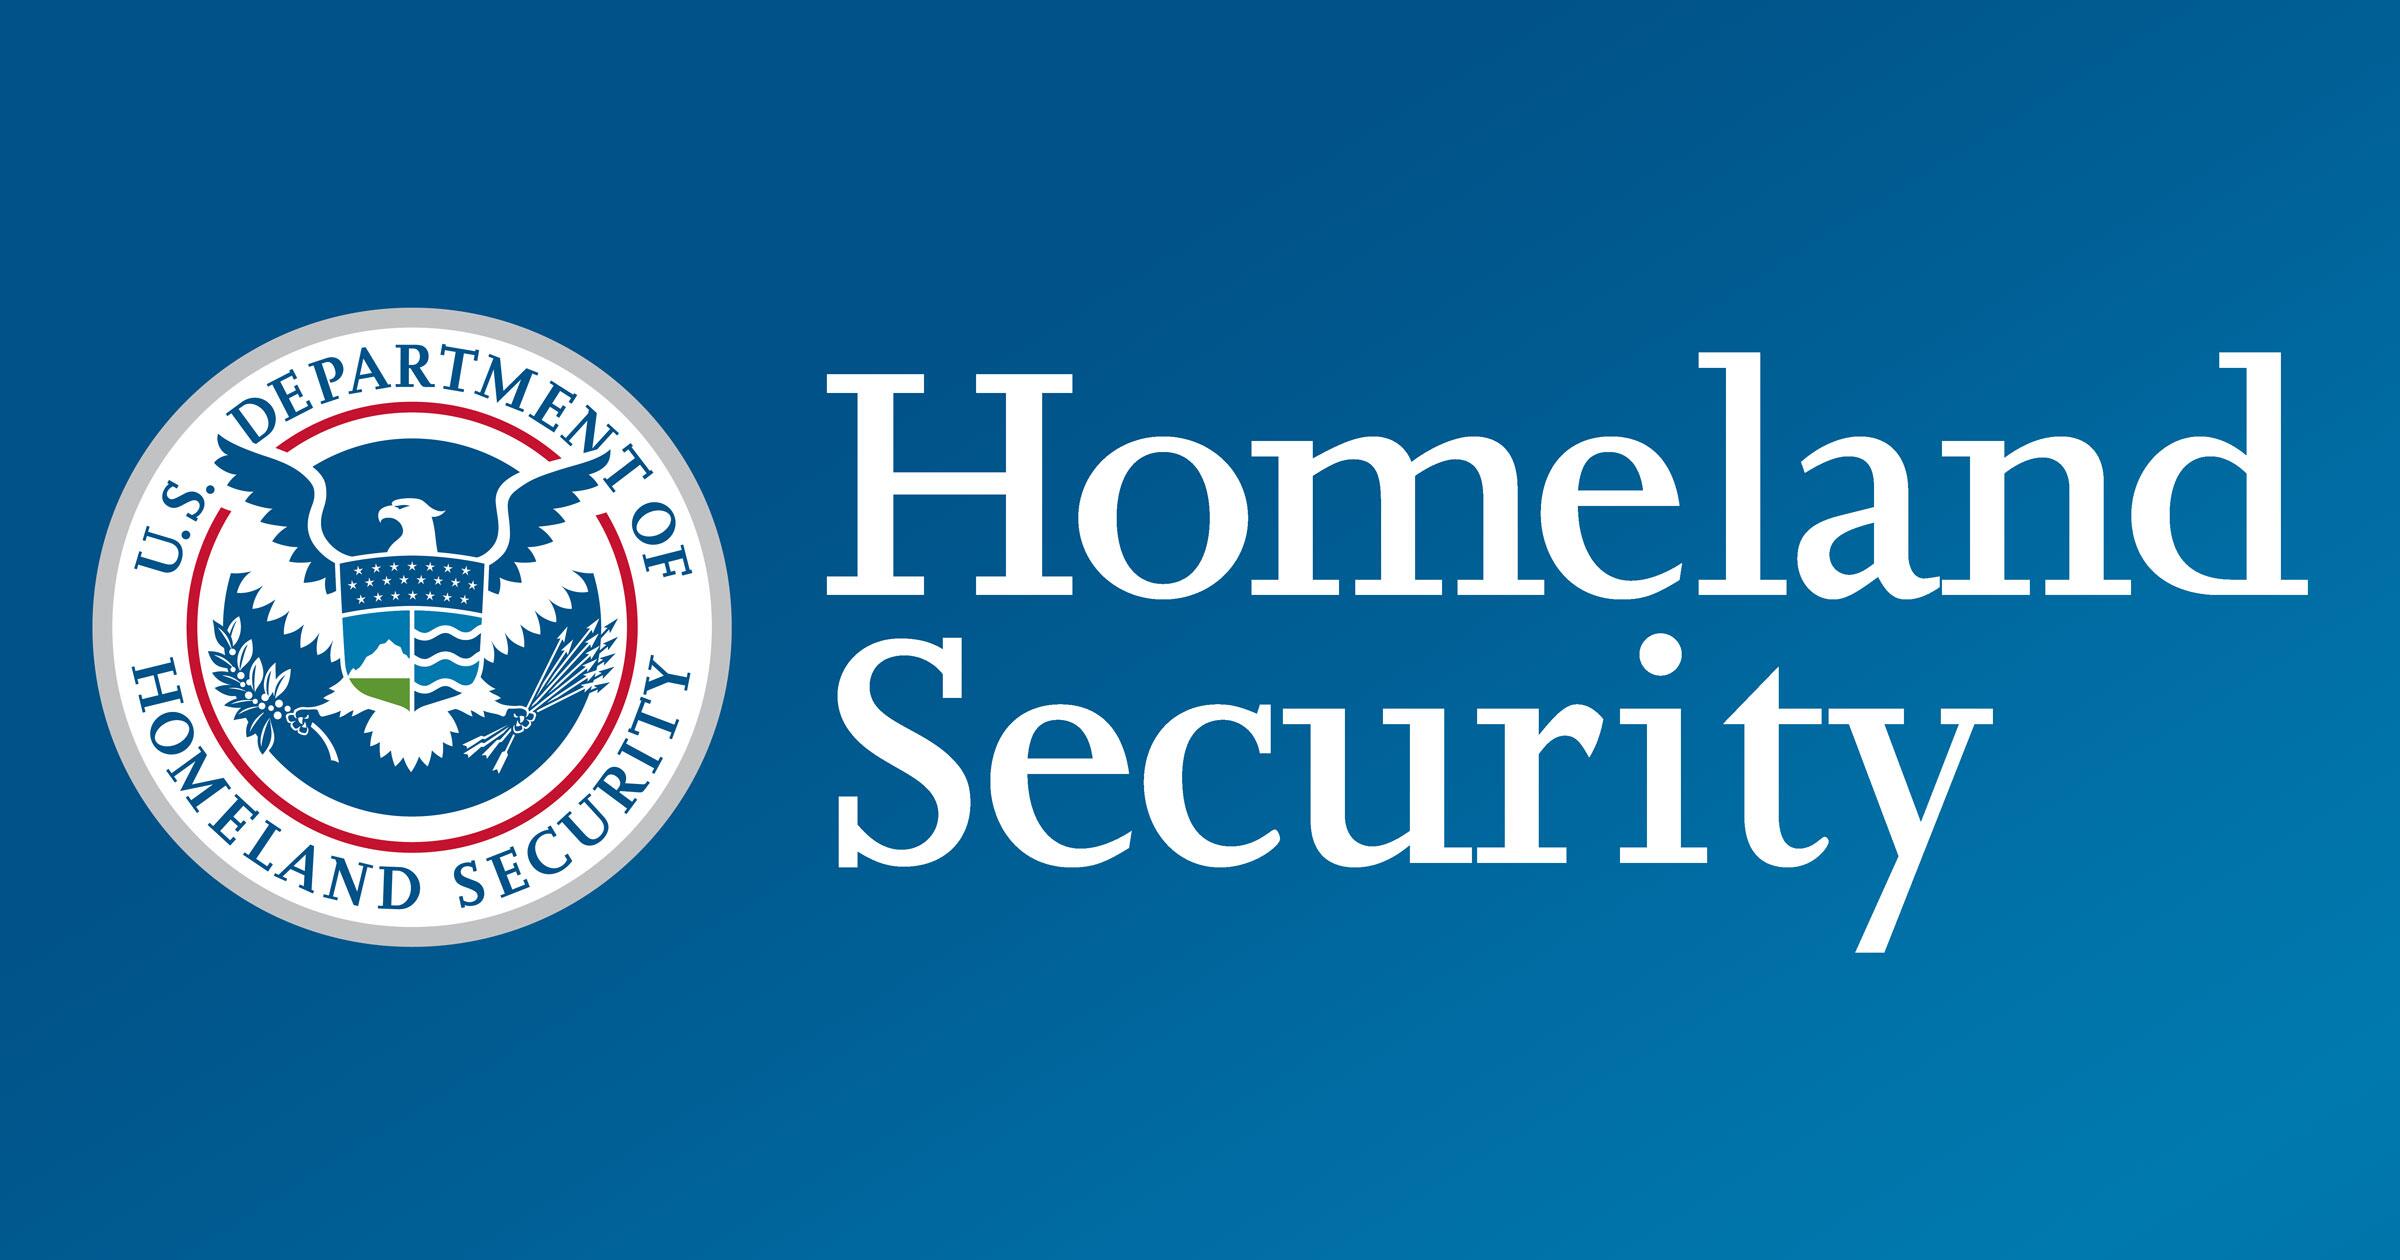 The Death of U.S. Homeland Security & Emergency Management Policy